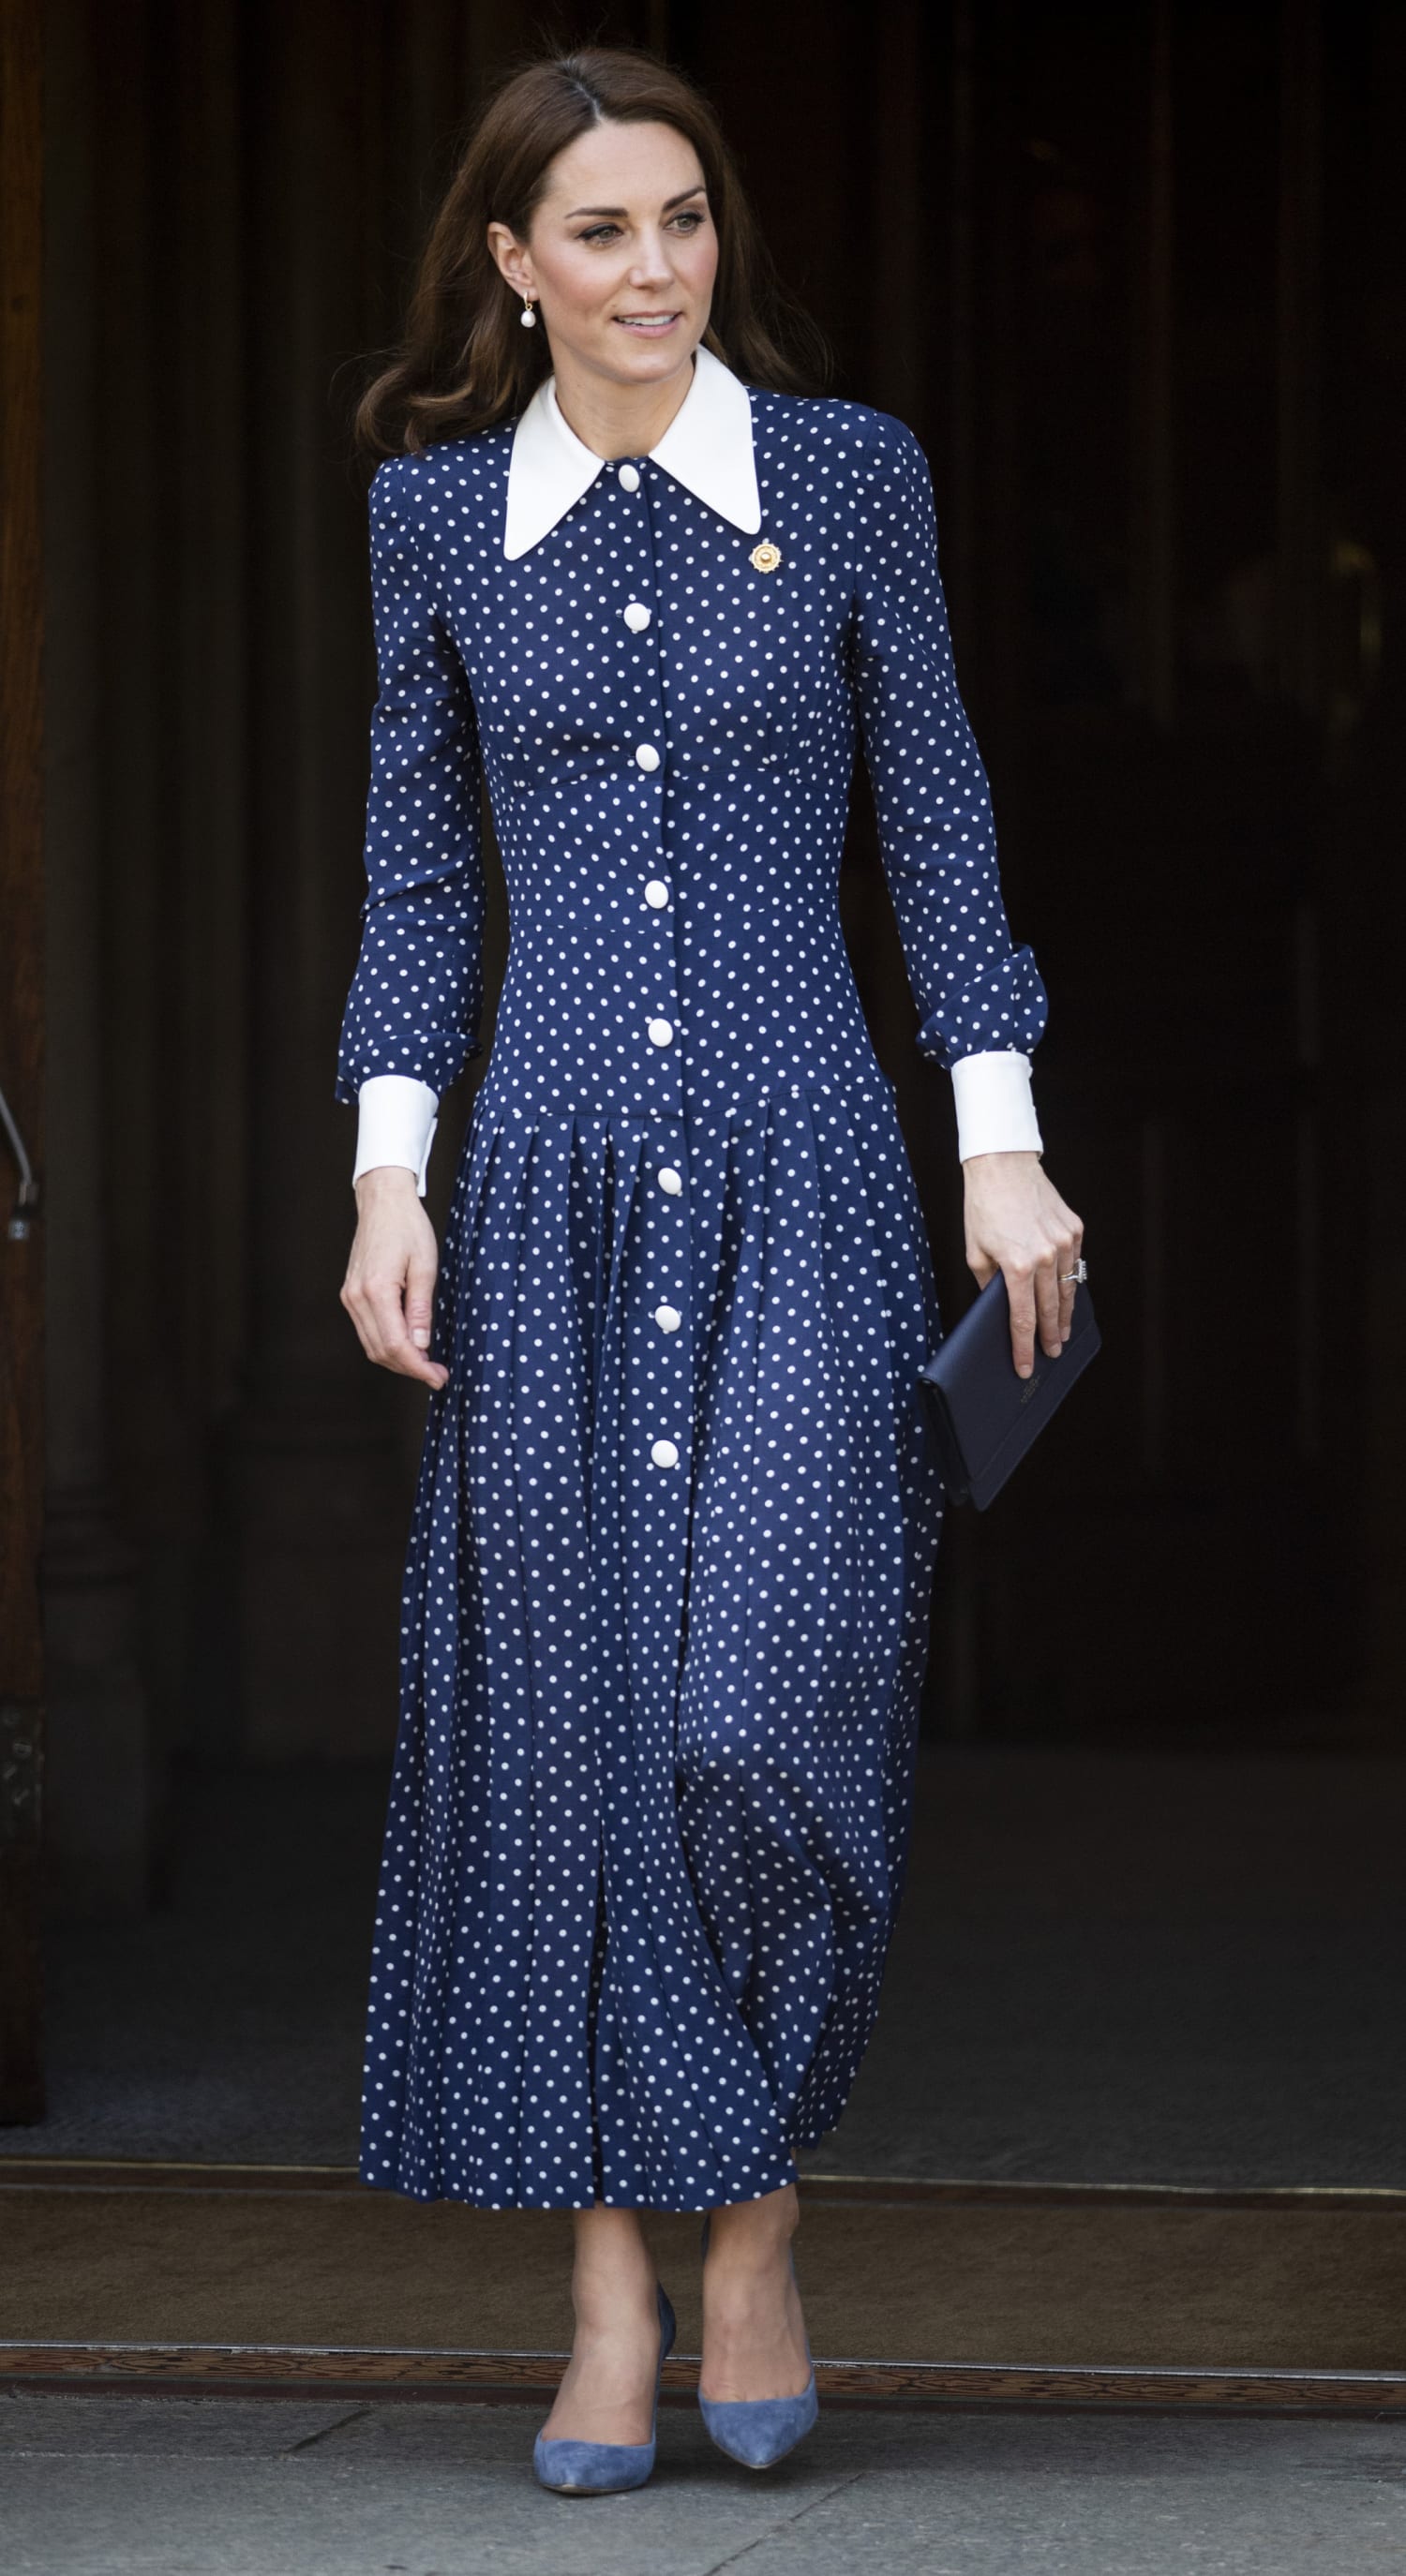 Kate Middleton Goes With a Navy and White Polka Dot For Appearance